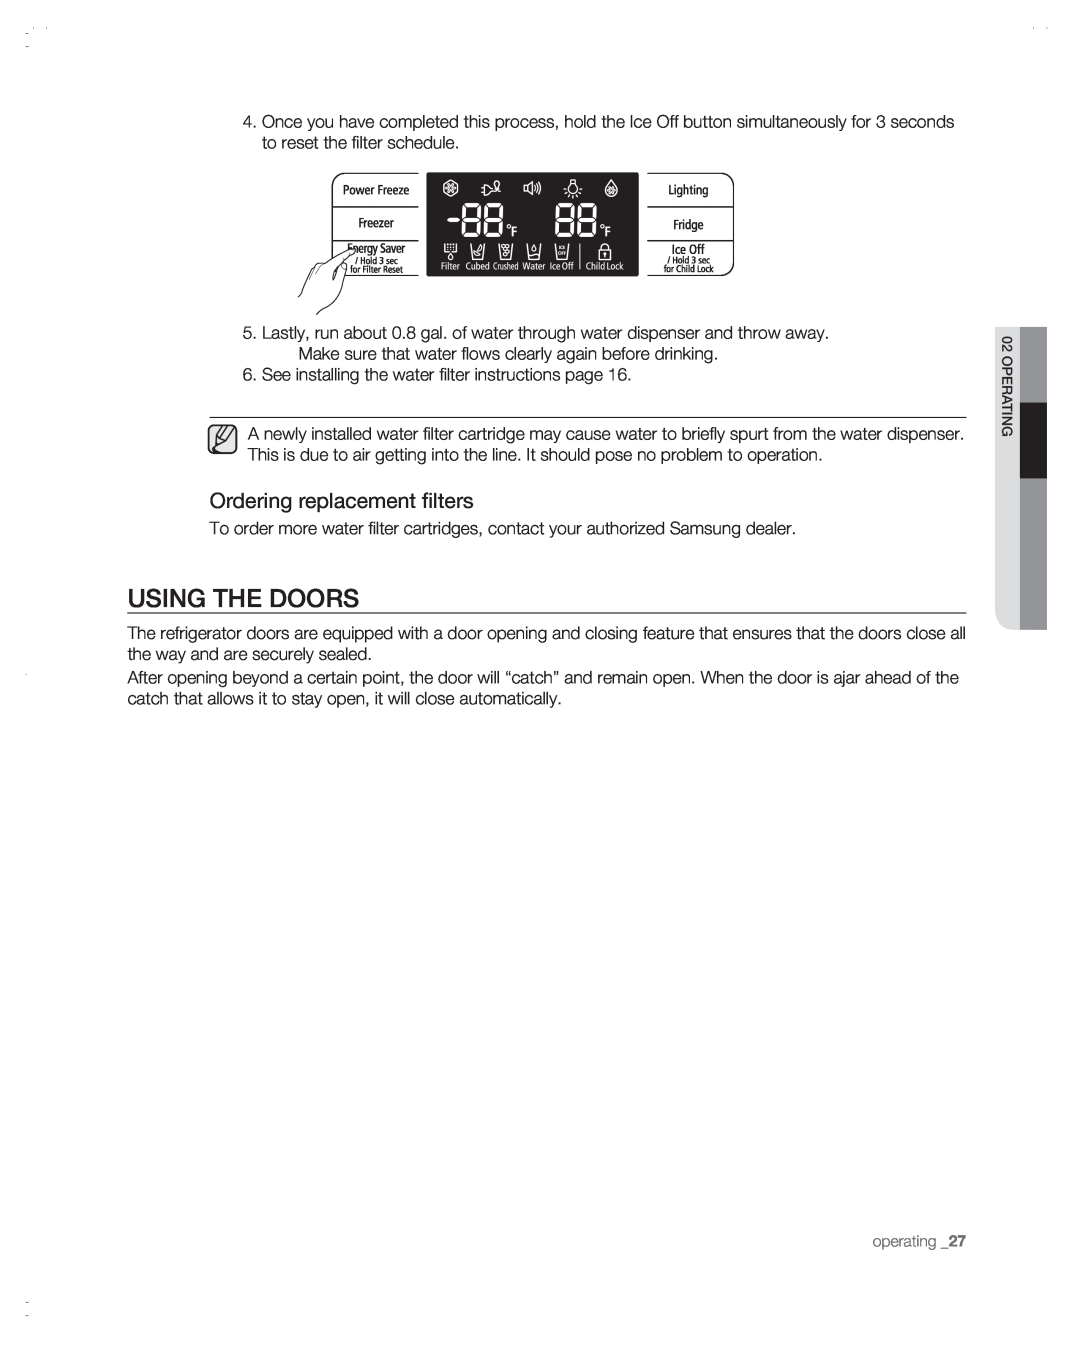 Samsung RSG257AABP user manual Using the doors, Ordering replacement filters 